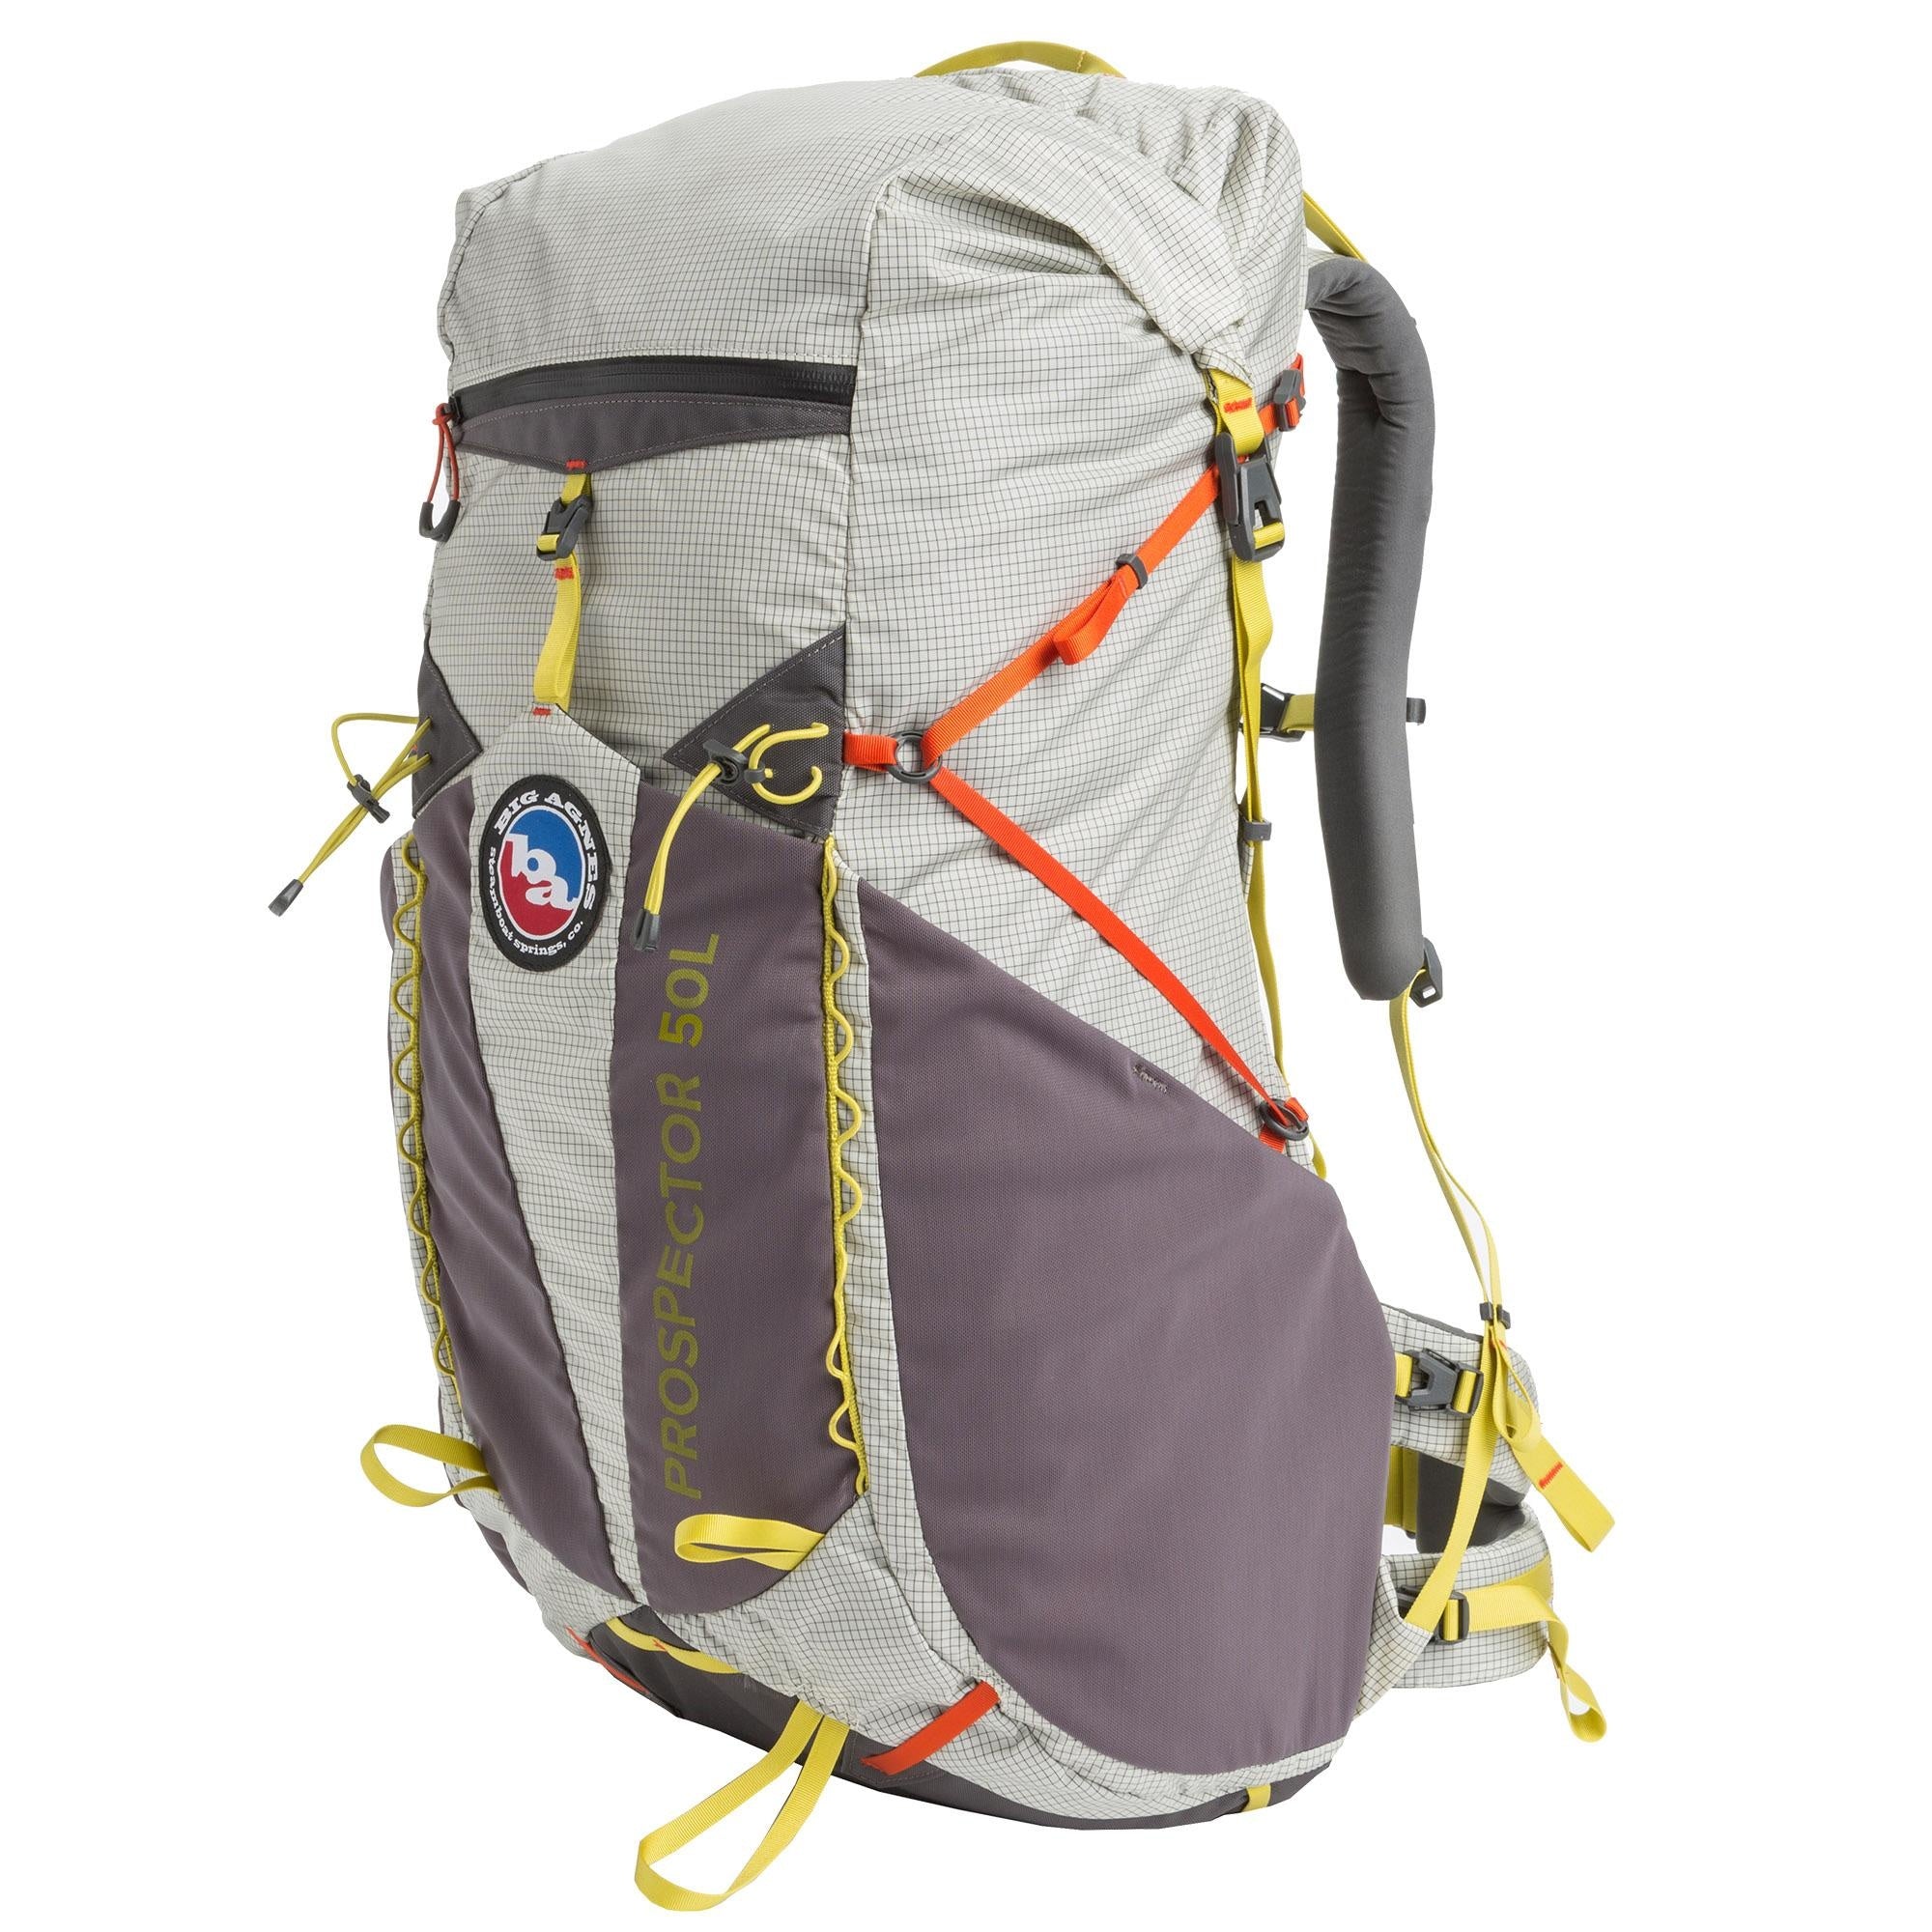 12 Best Hiking Backpacks To Buy Online In Australia in 2021 | escape.com.au